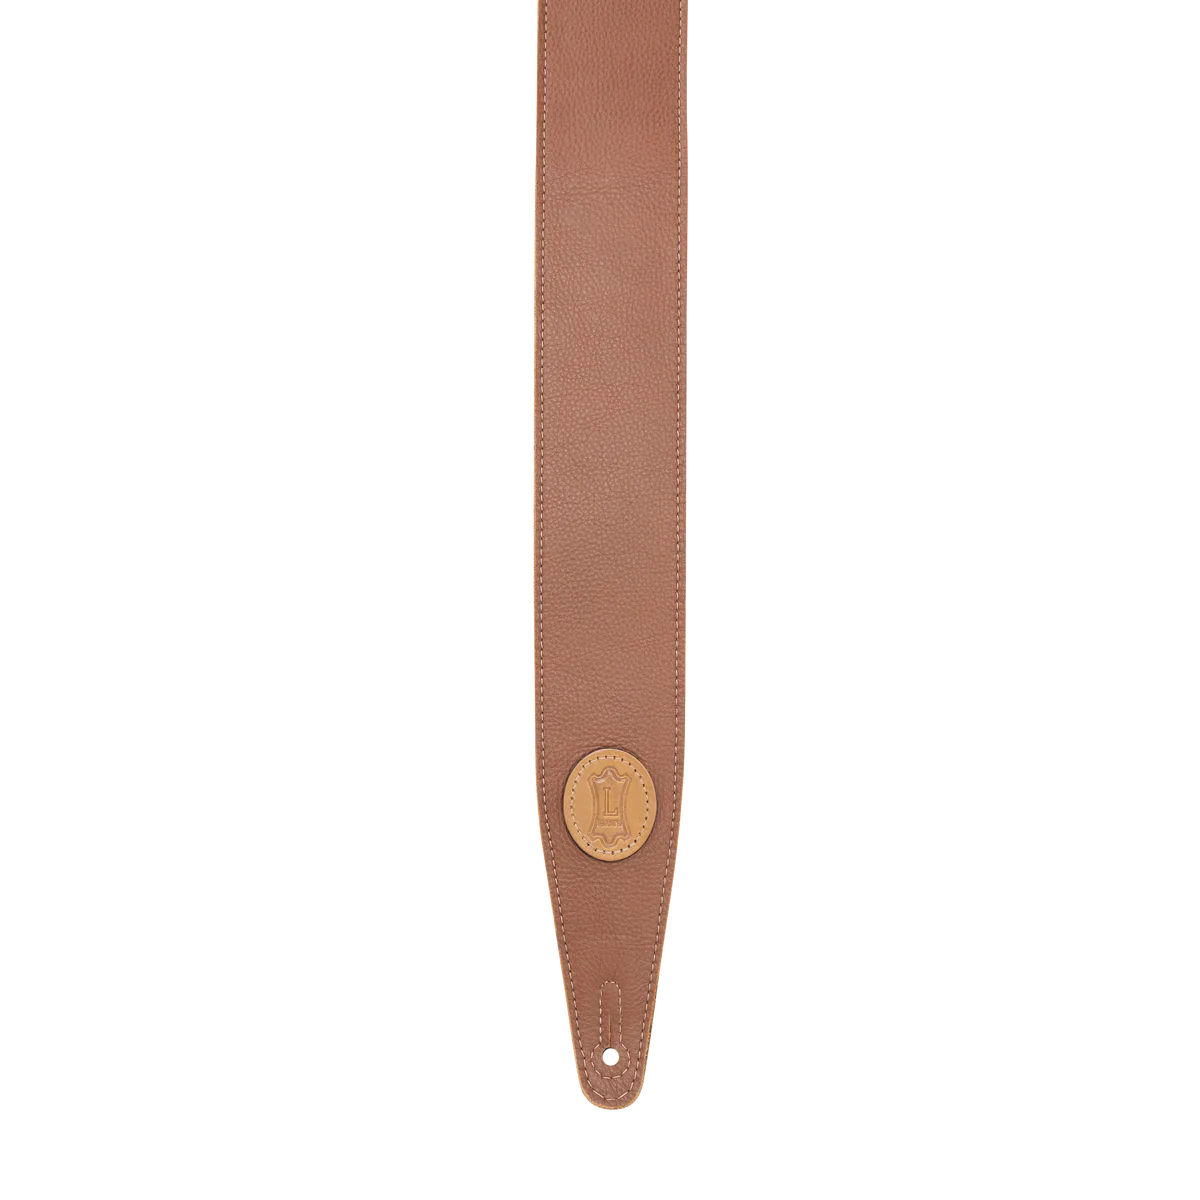 Levy's 2.5" Stratus Garment Leather Strap, Tan